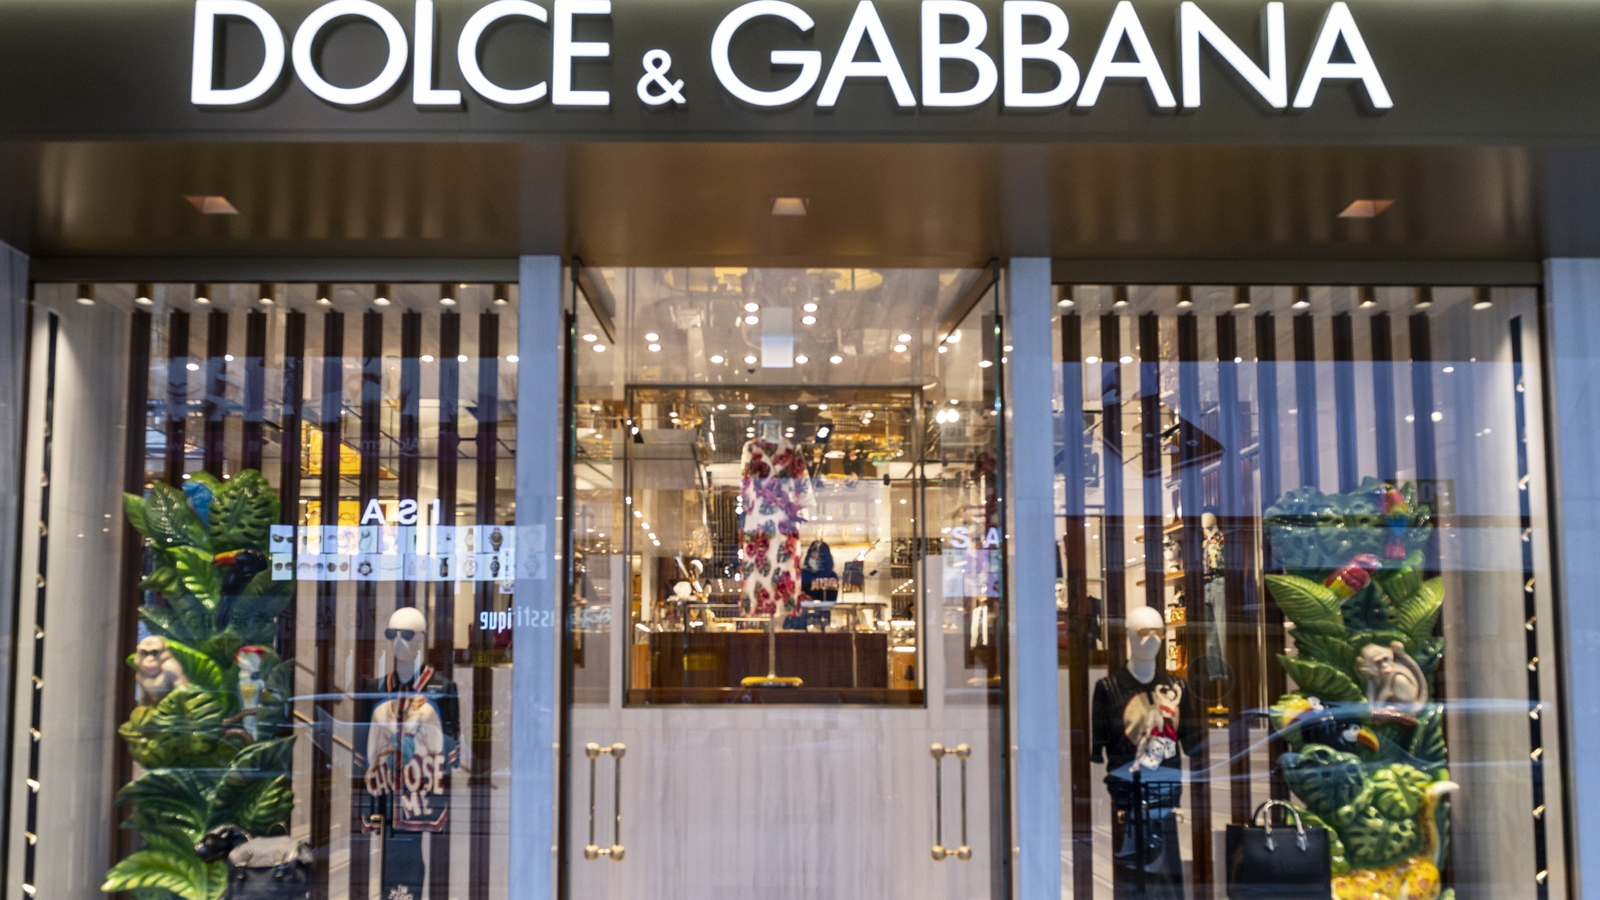 Italy's Dolce & Gabbana to ditch fur